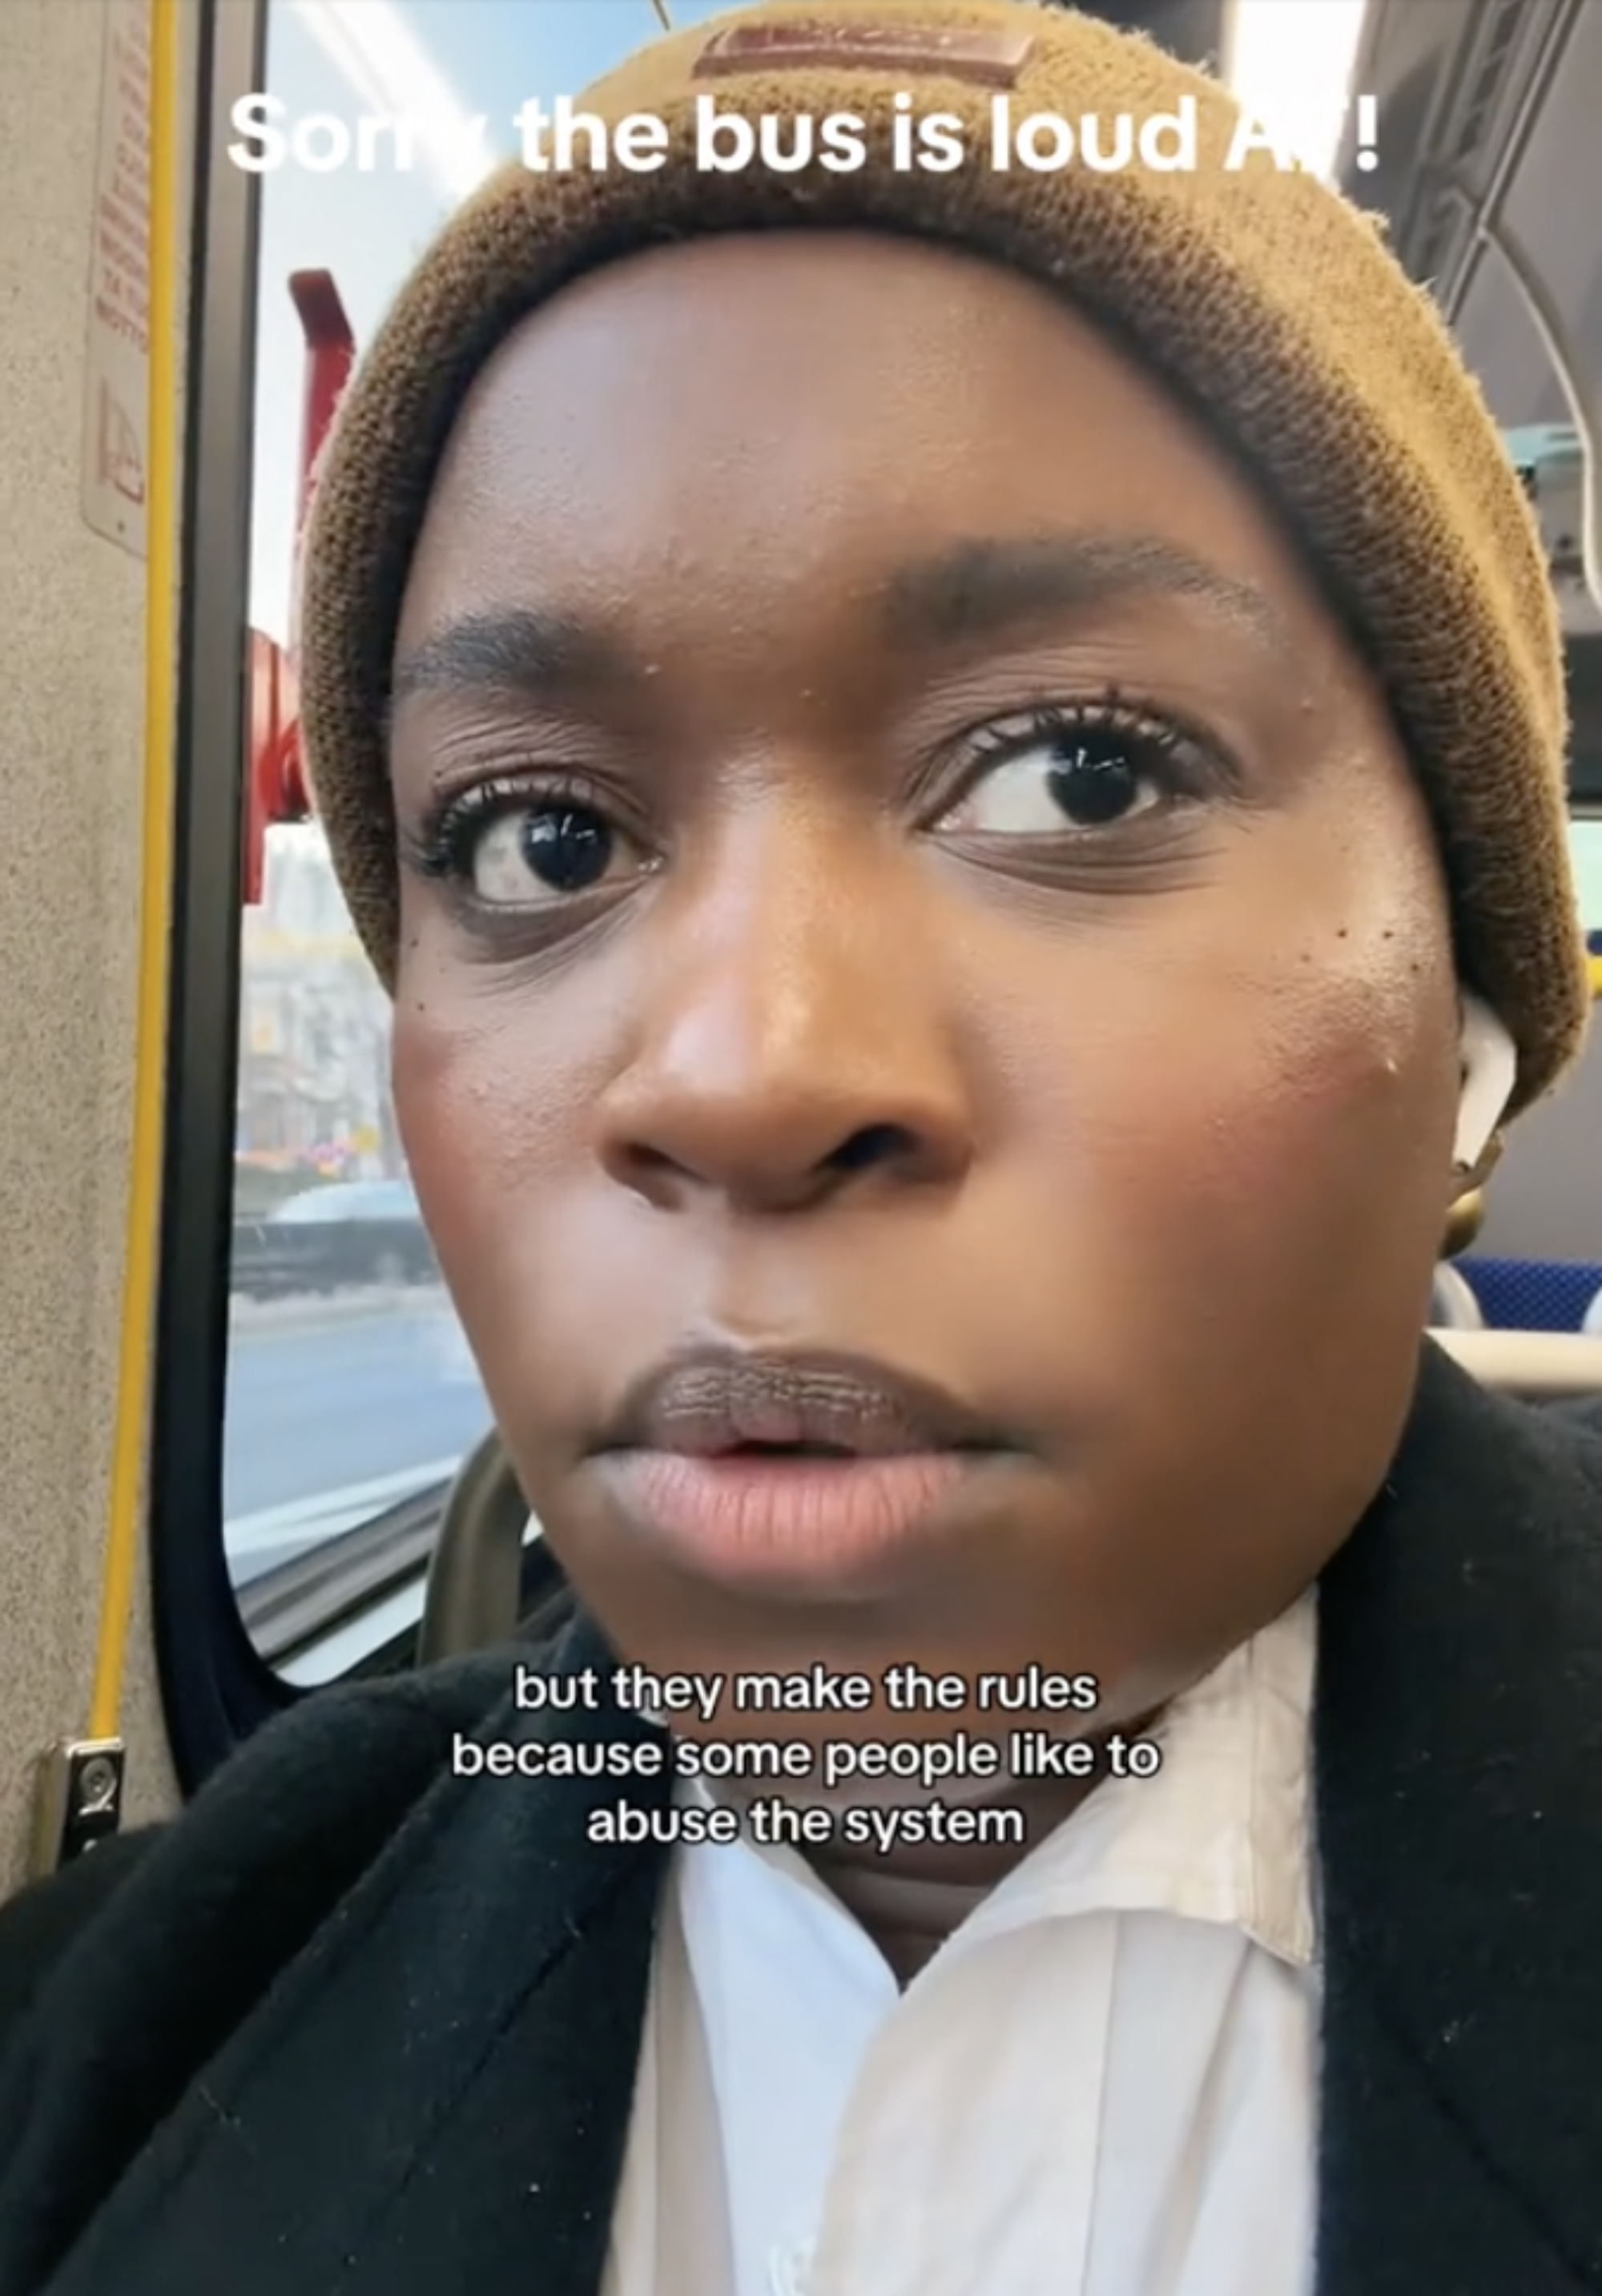 imani on bus wearing a hat, with text overlay: &quot;they make the rules because some people like to abuse the system&quot;